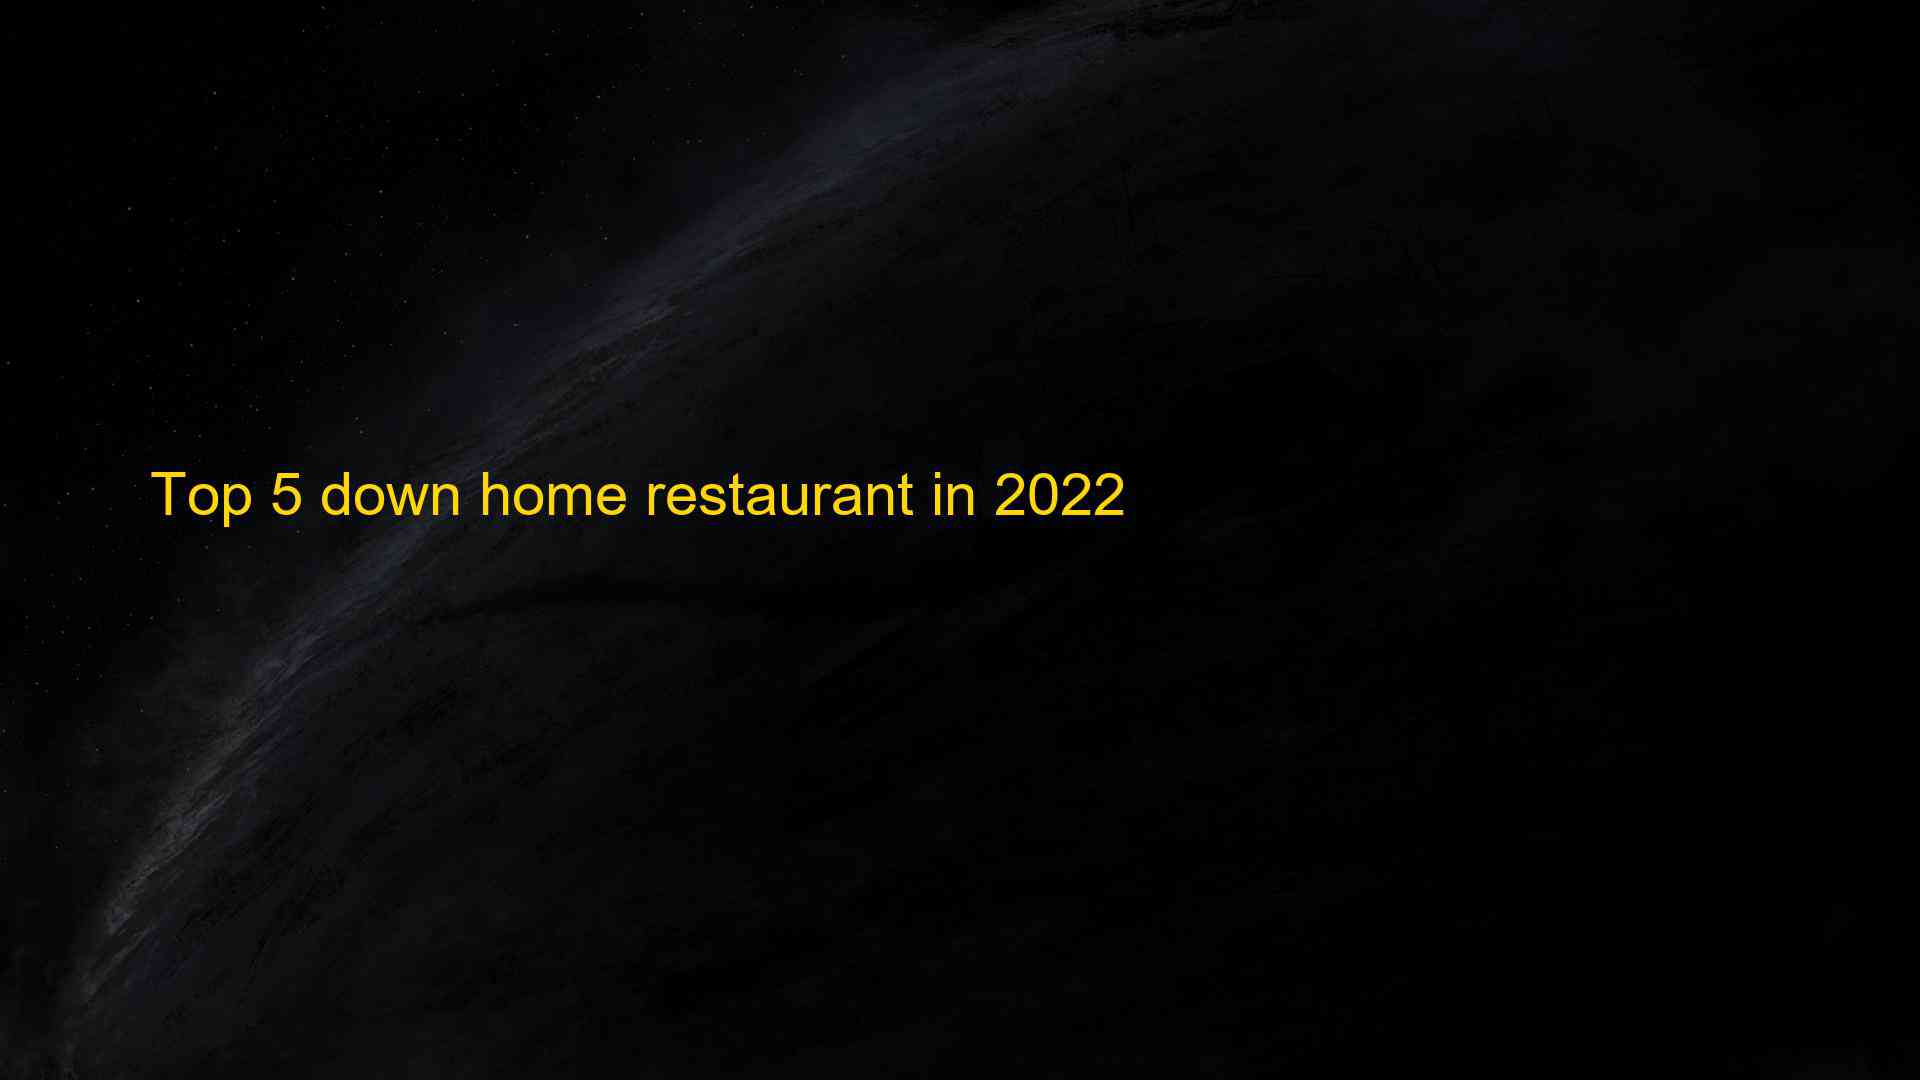 Top 5 down home restaurant in 2022 1663177376